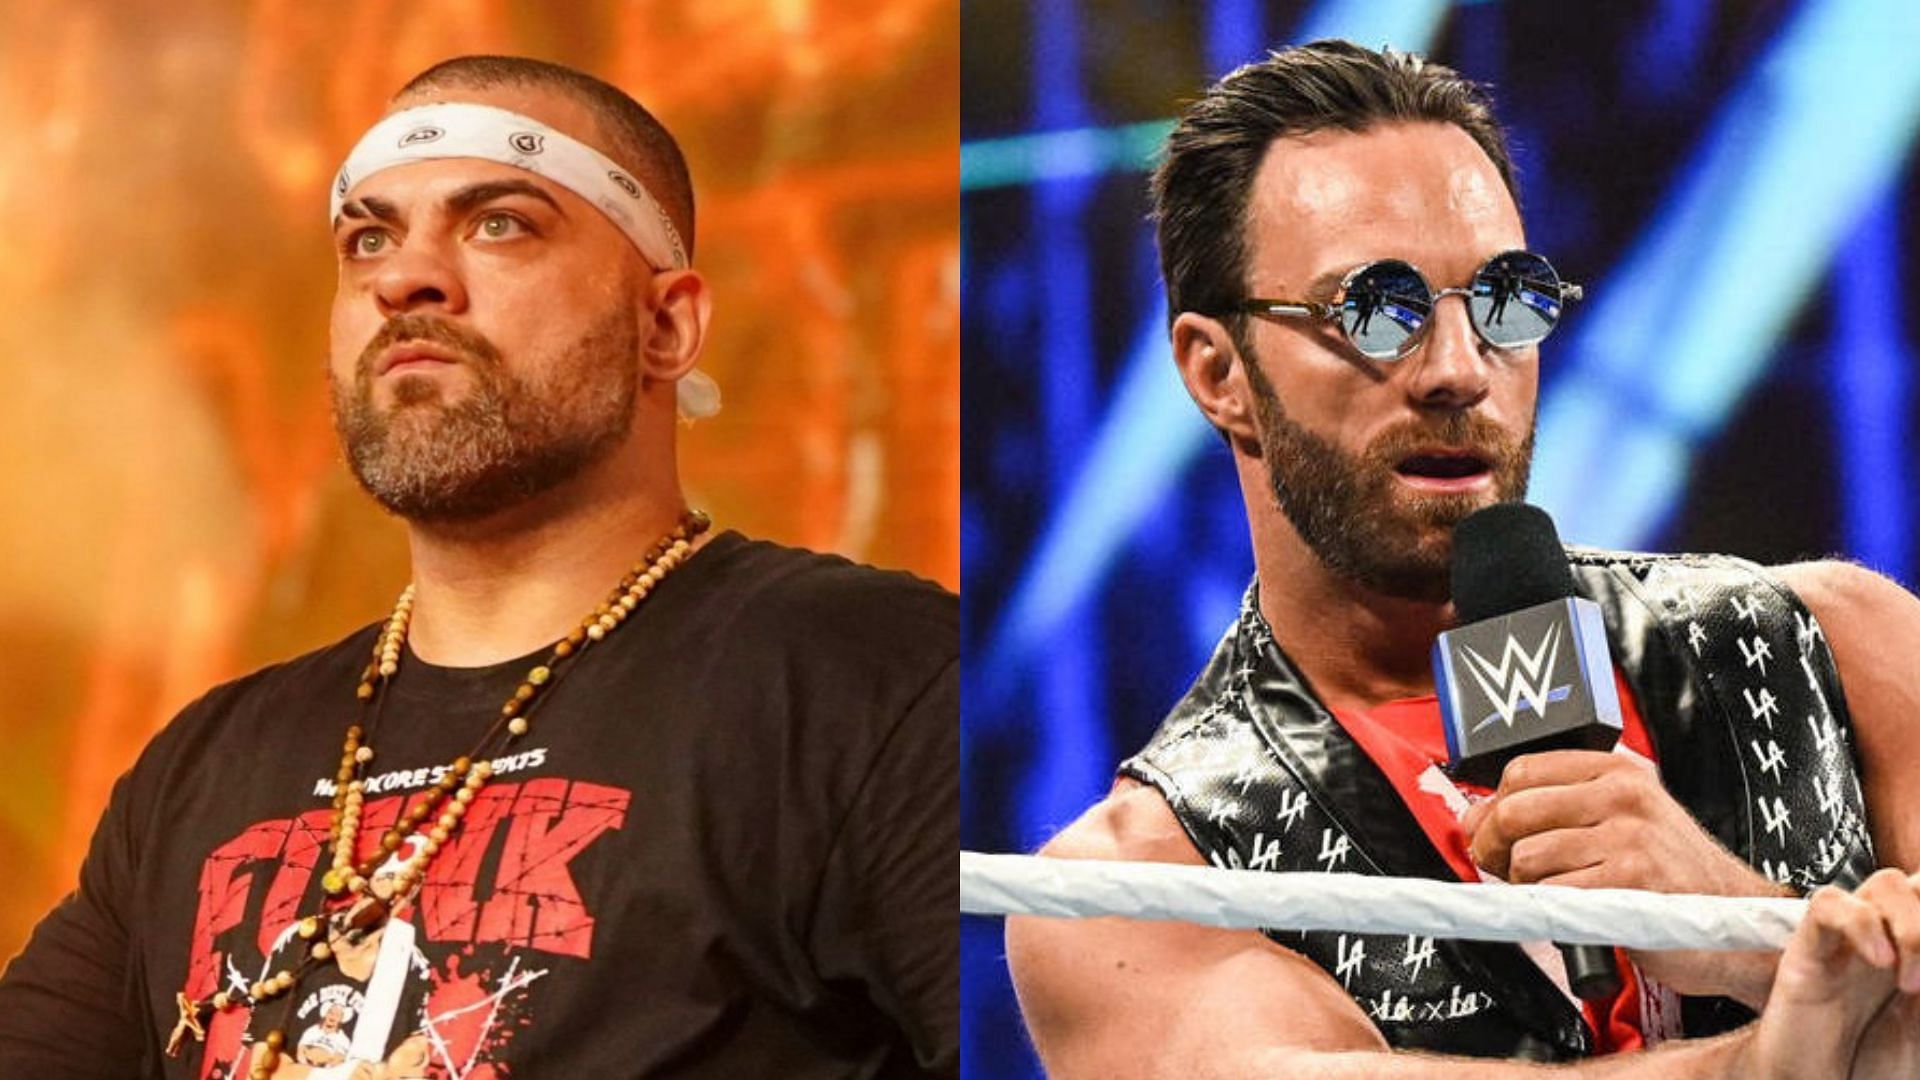 Eddie Kingston has opened up about LA Knight